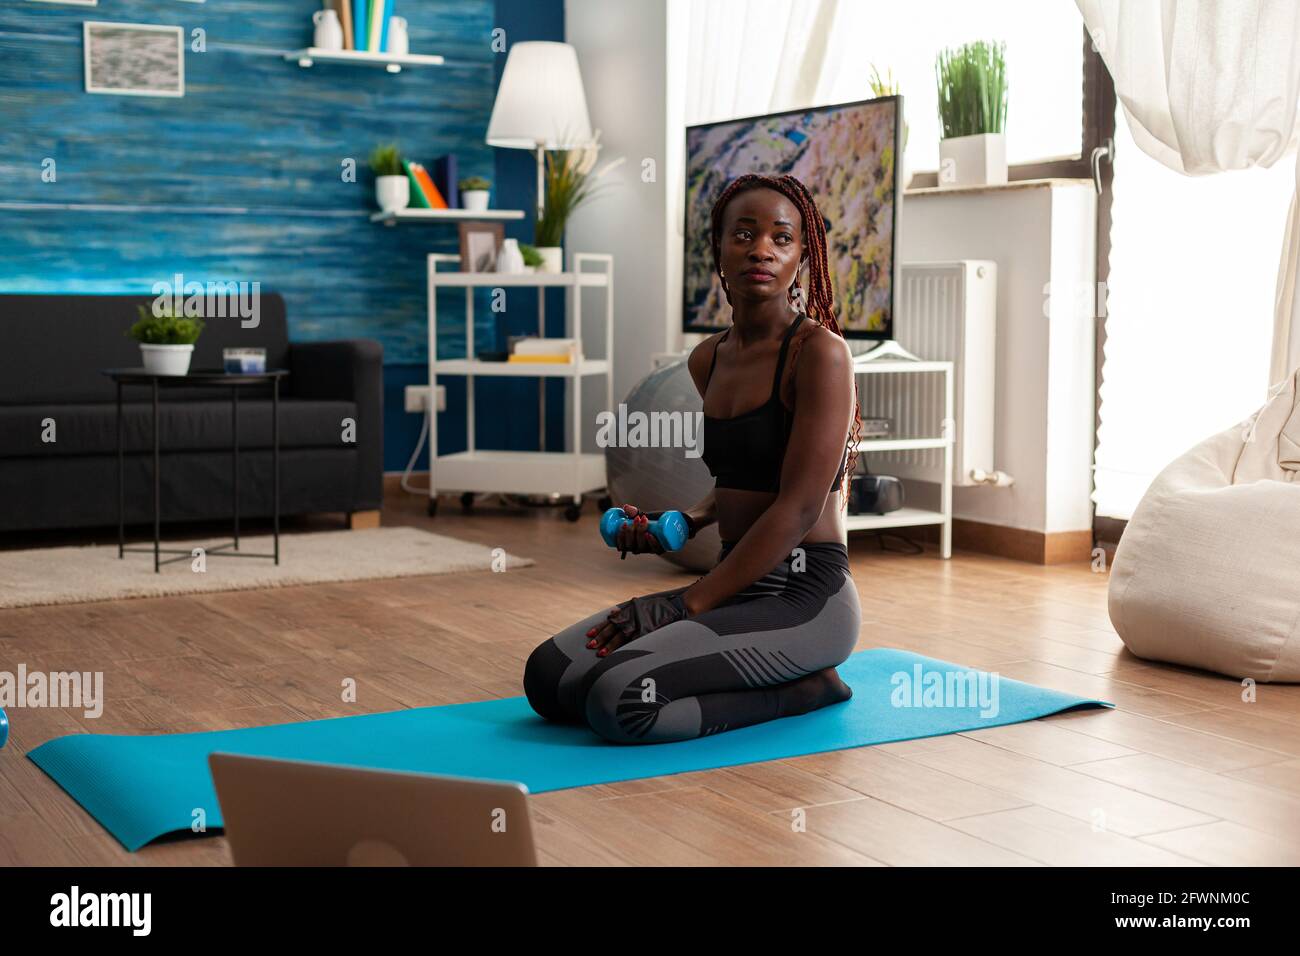 Fit athletic active black woman flexing arms working biceps, sitting on yoga mat in home living room exercising following video instructions from laptop, having a healthy lifestyle. Stock Photo